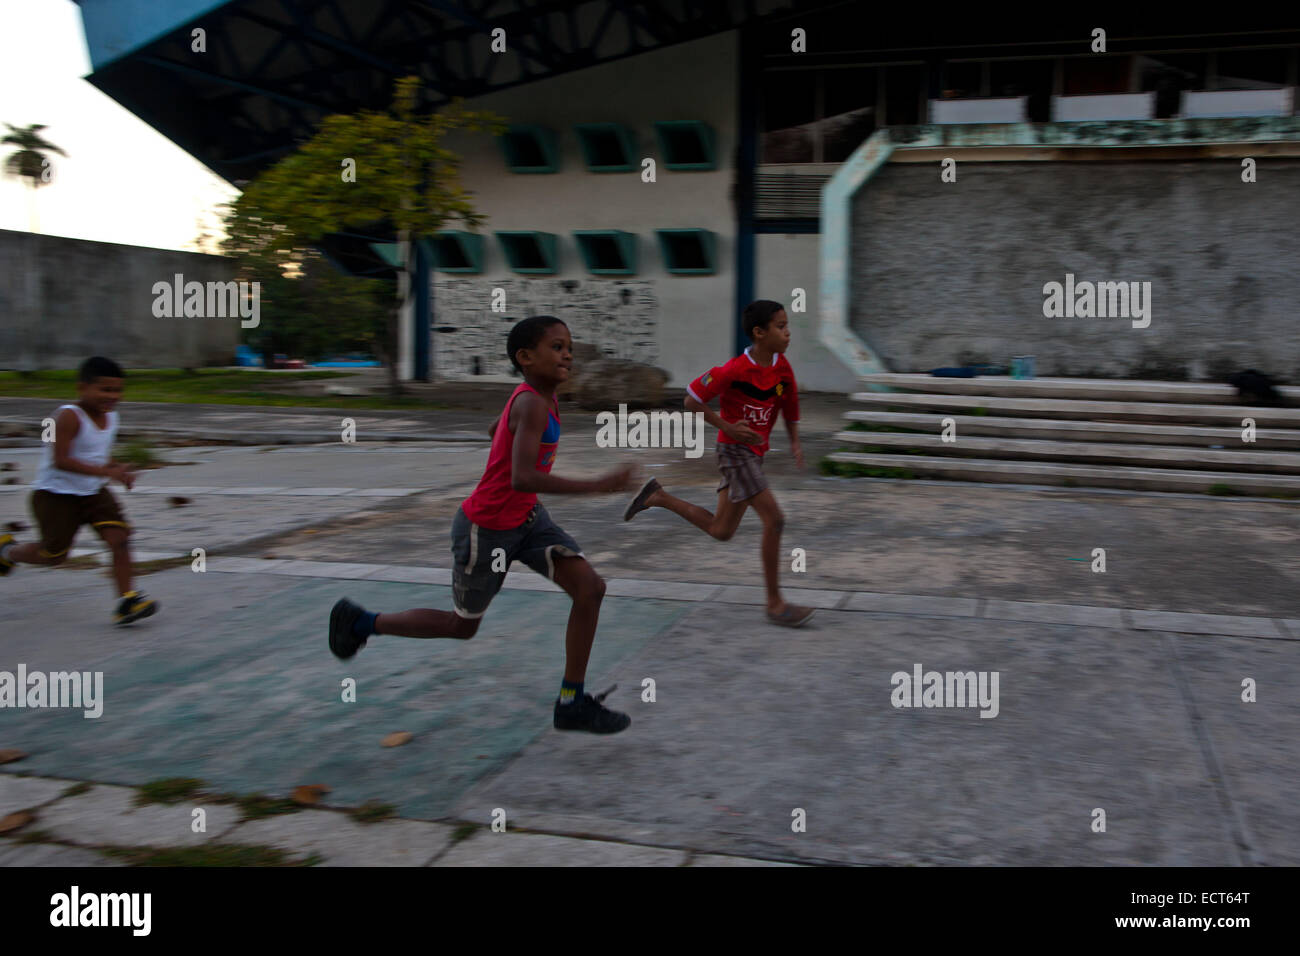 Havana, Cuba. 18th Dec, 2014. Children wearing leisure shoes practice sprint running on the non-sport purpose concrete ground, in Havana, Cuba, on Dec. 18, 2014. After the declaration of restoring diplomatic relations between Cuba and the U.S. from both presidents, local Cubans demand the abortion of blockage from Washington. © Liu Bin/Xinhua/Alamy Live News Stock Photo